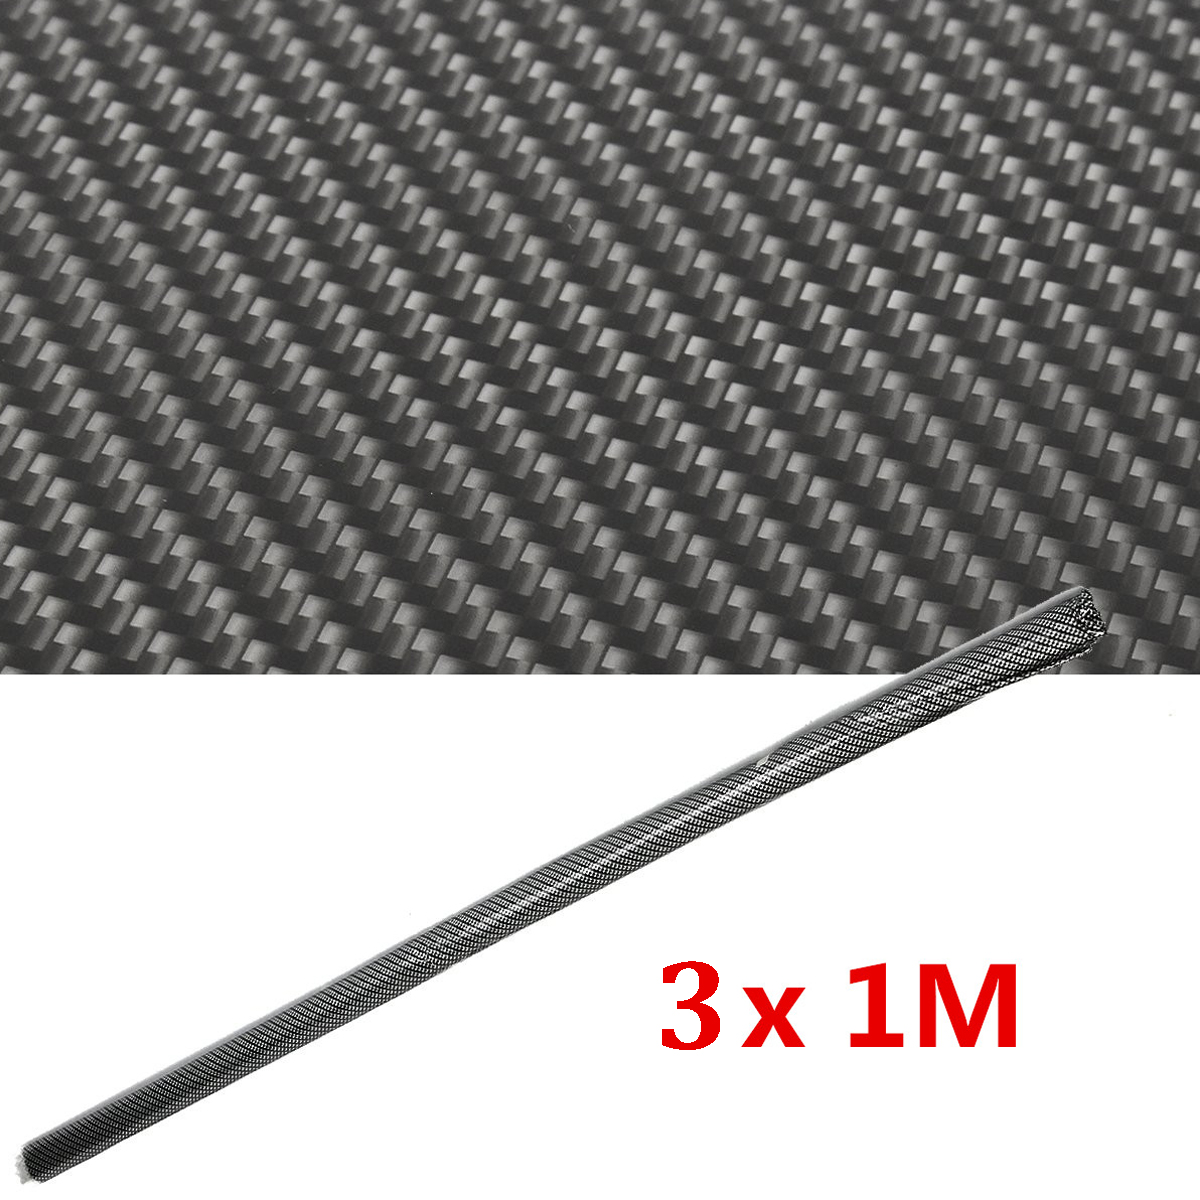 1x3m-Carbon-Fiber-Pattern-Hydrographic-Dipping-Film-Water-Transfer-Printing-Films-1151039-3